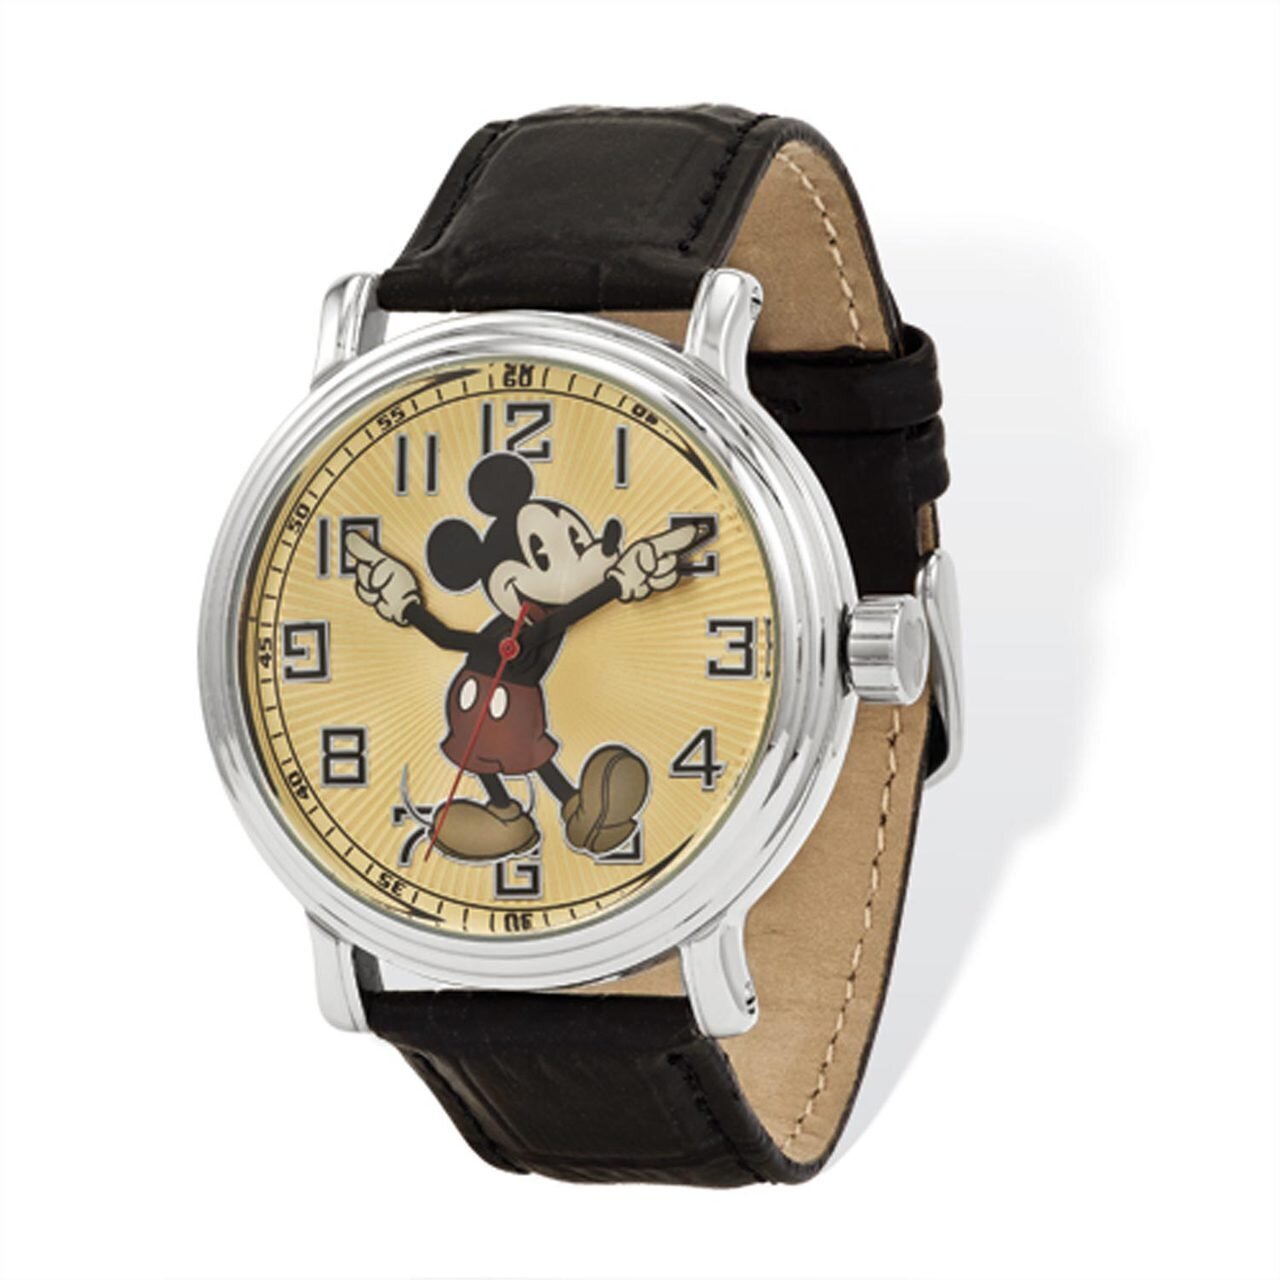 Disney Black Leather with Moving Arms Mickey Mouse Watch Adult Size XWA4390